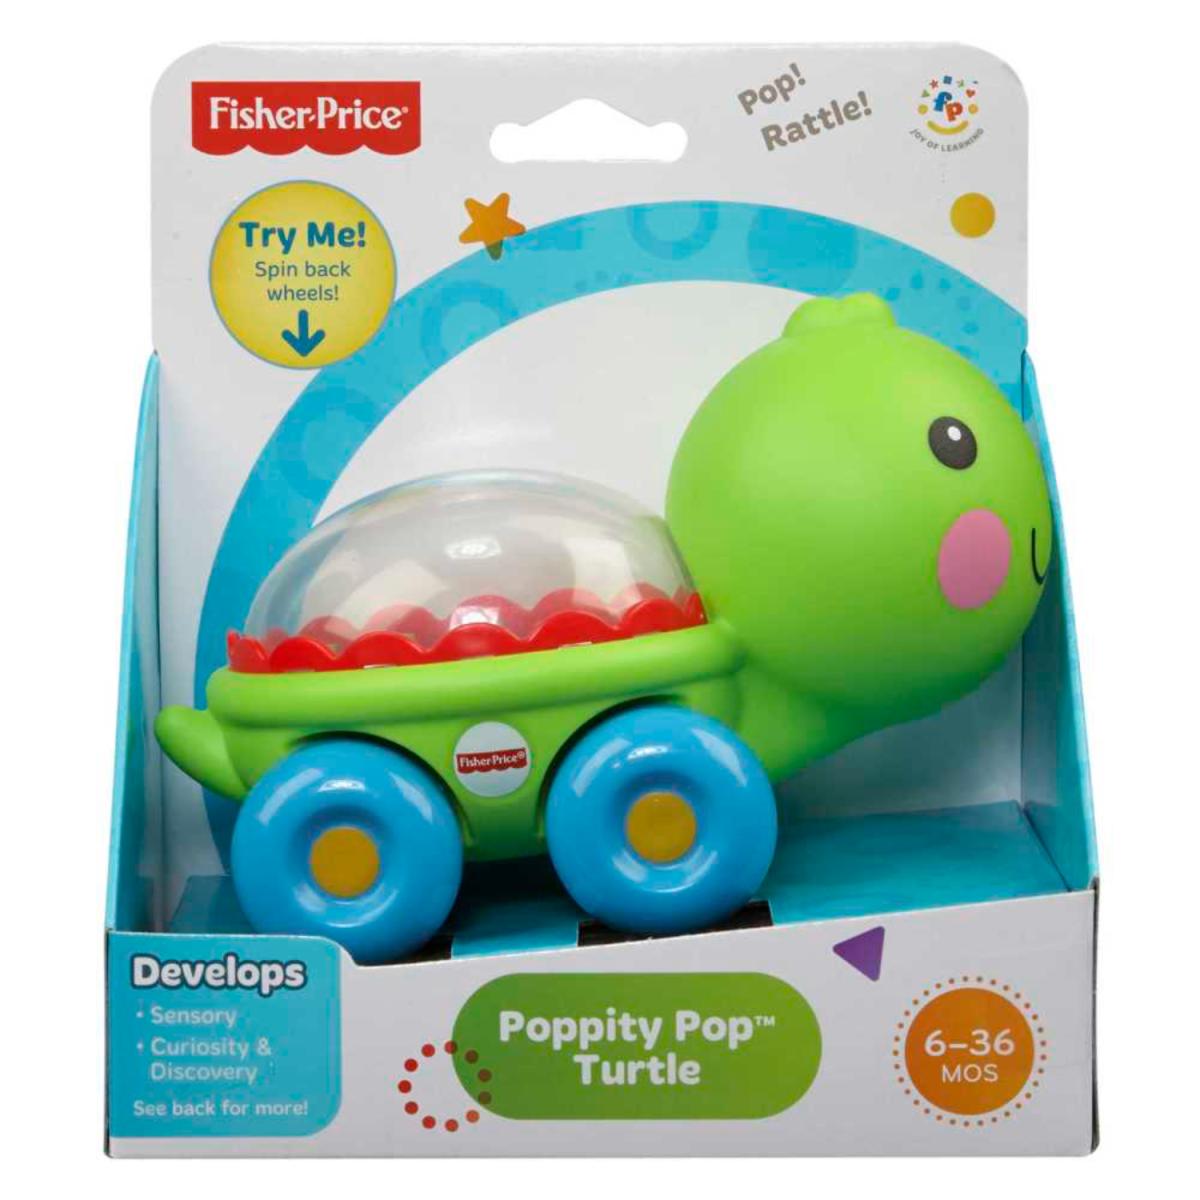 FISHER PRICE VEHICULOS PARA BEBES SURTID